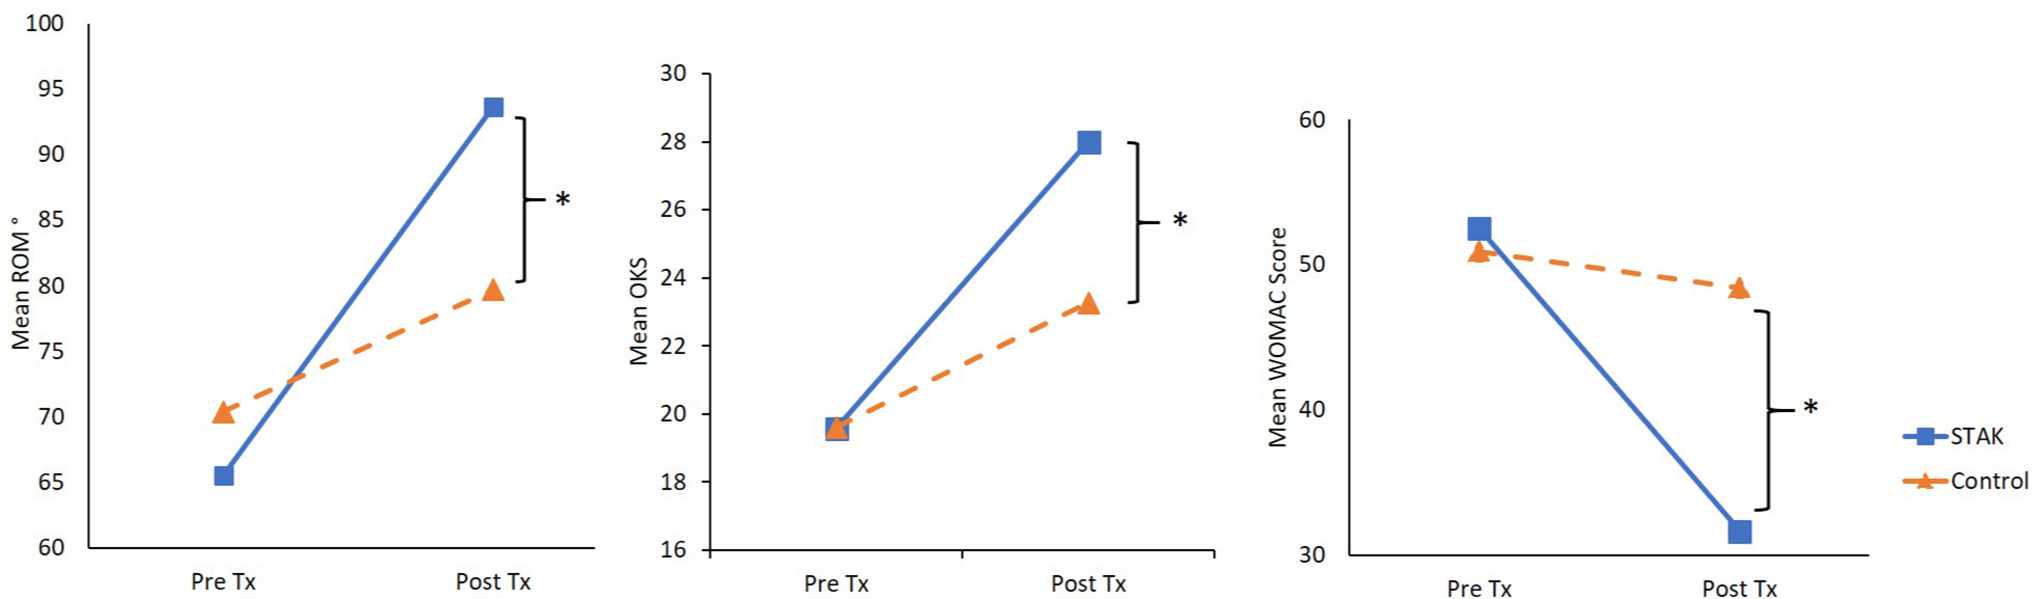 Fig. 4 
          Mean ROM, OKS, and WOMAC before and after eight-week treatment period (Tx) - STAK versus standard treatment. A high WOMAC score indicates extreme pain/dysfunction, a low OKS score indicates extreme pain/difficulty *The STAK group demonstrated a significantly larger mean improvement in ROM, WOMAC, and OKS (p < 0.0005).
        